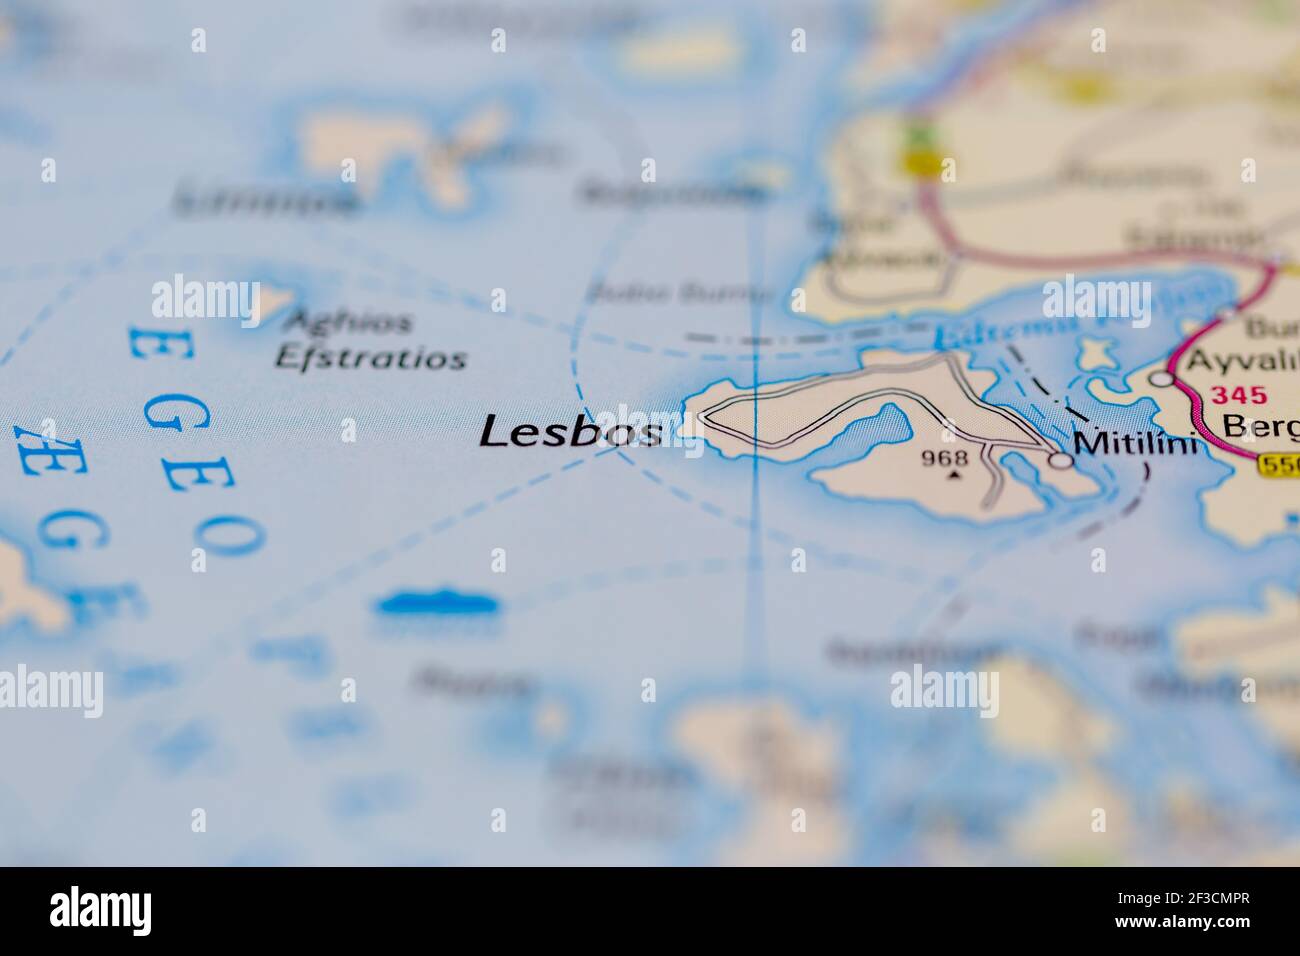 Lesbos Shown on a geography map or road map Stock Photo